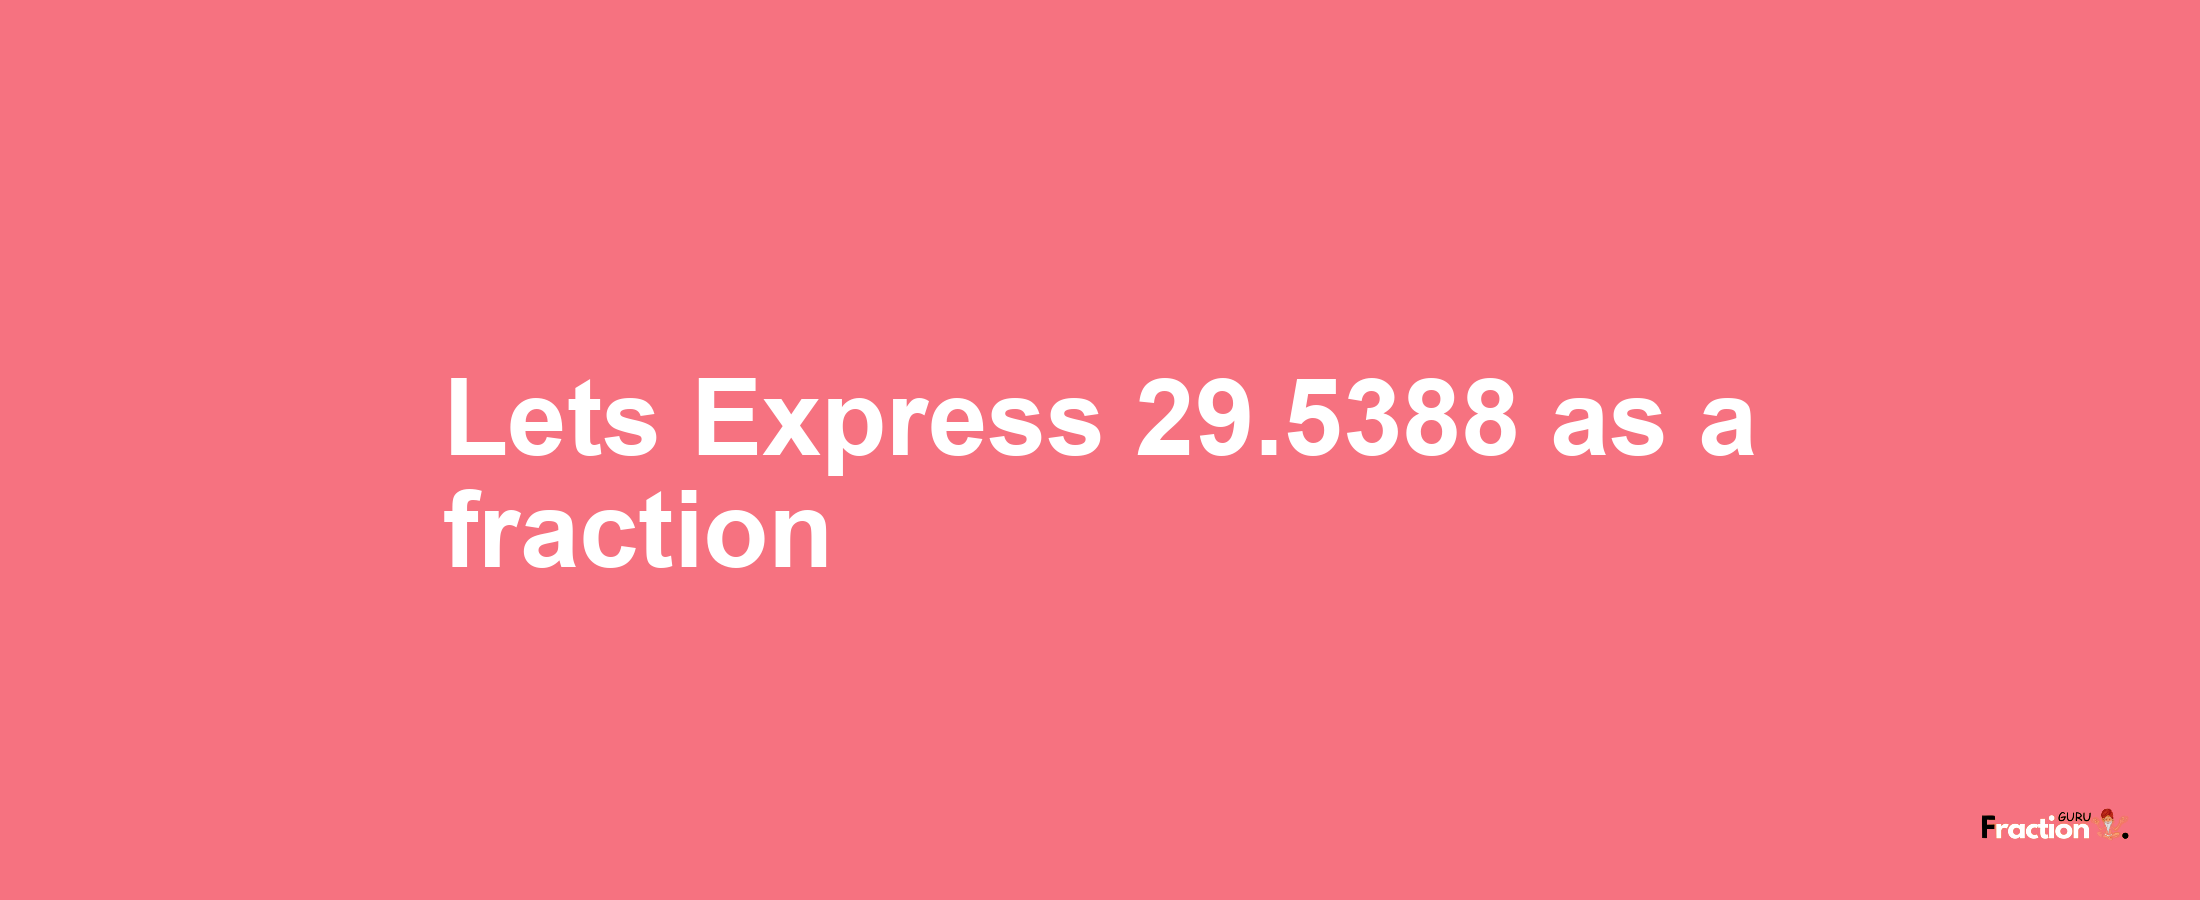 Lets Express 29.5388 as afraction